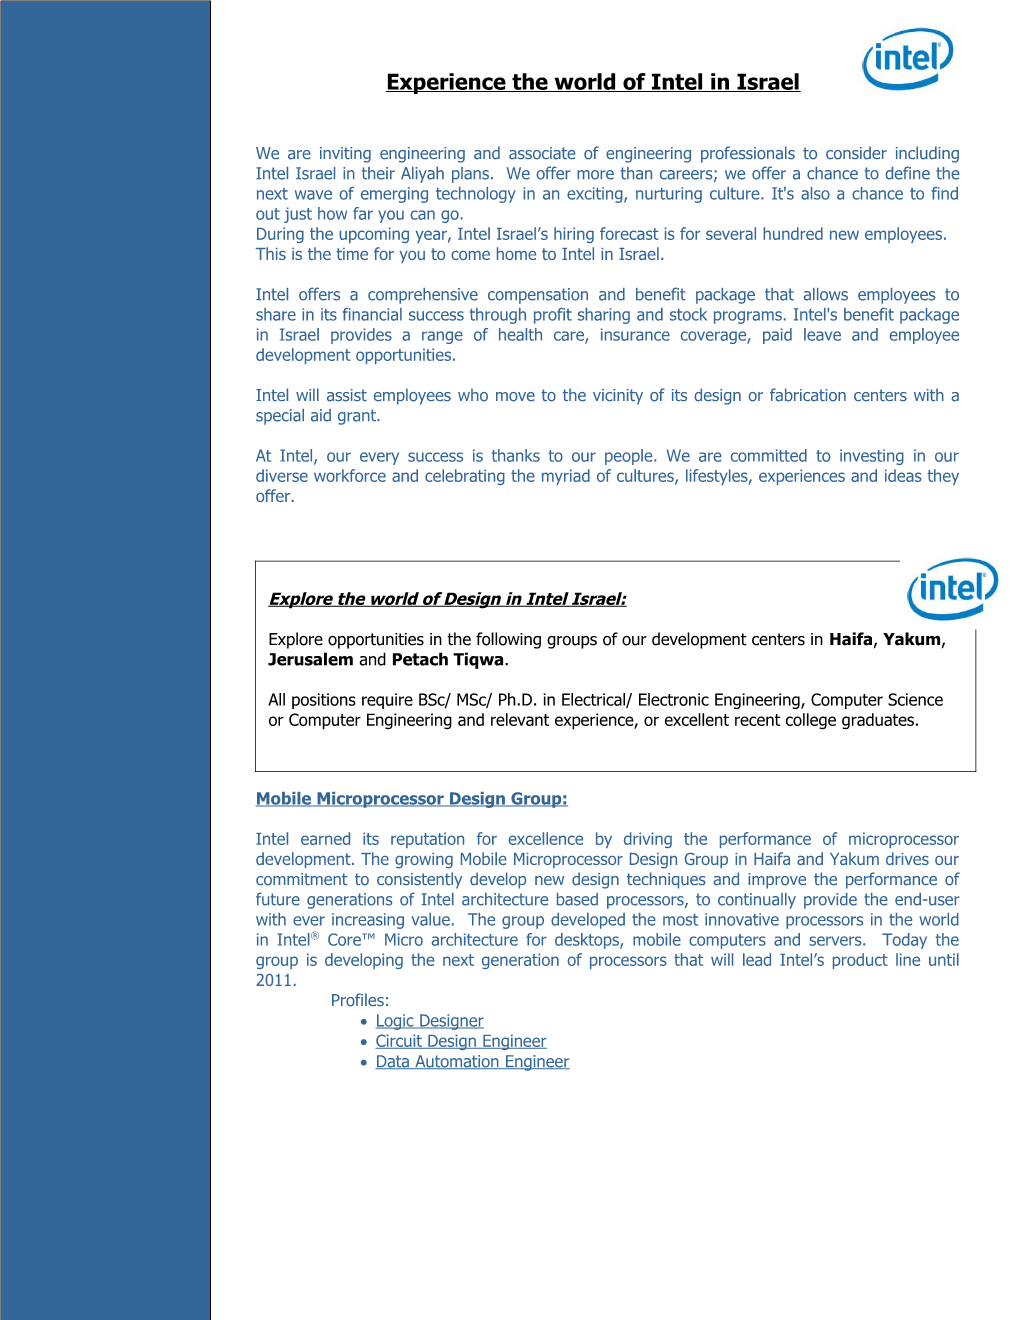 Experience the World of Intel in Israel